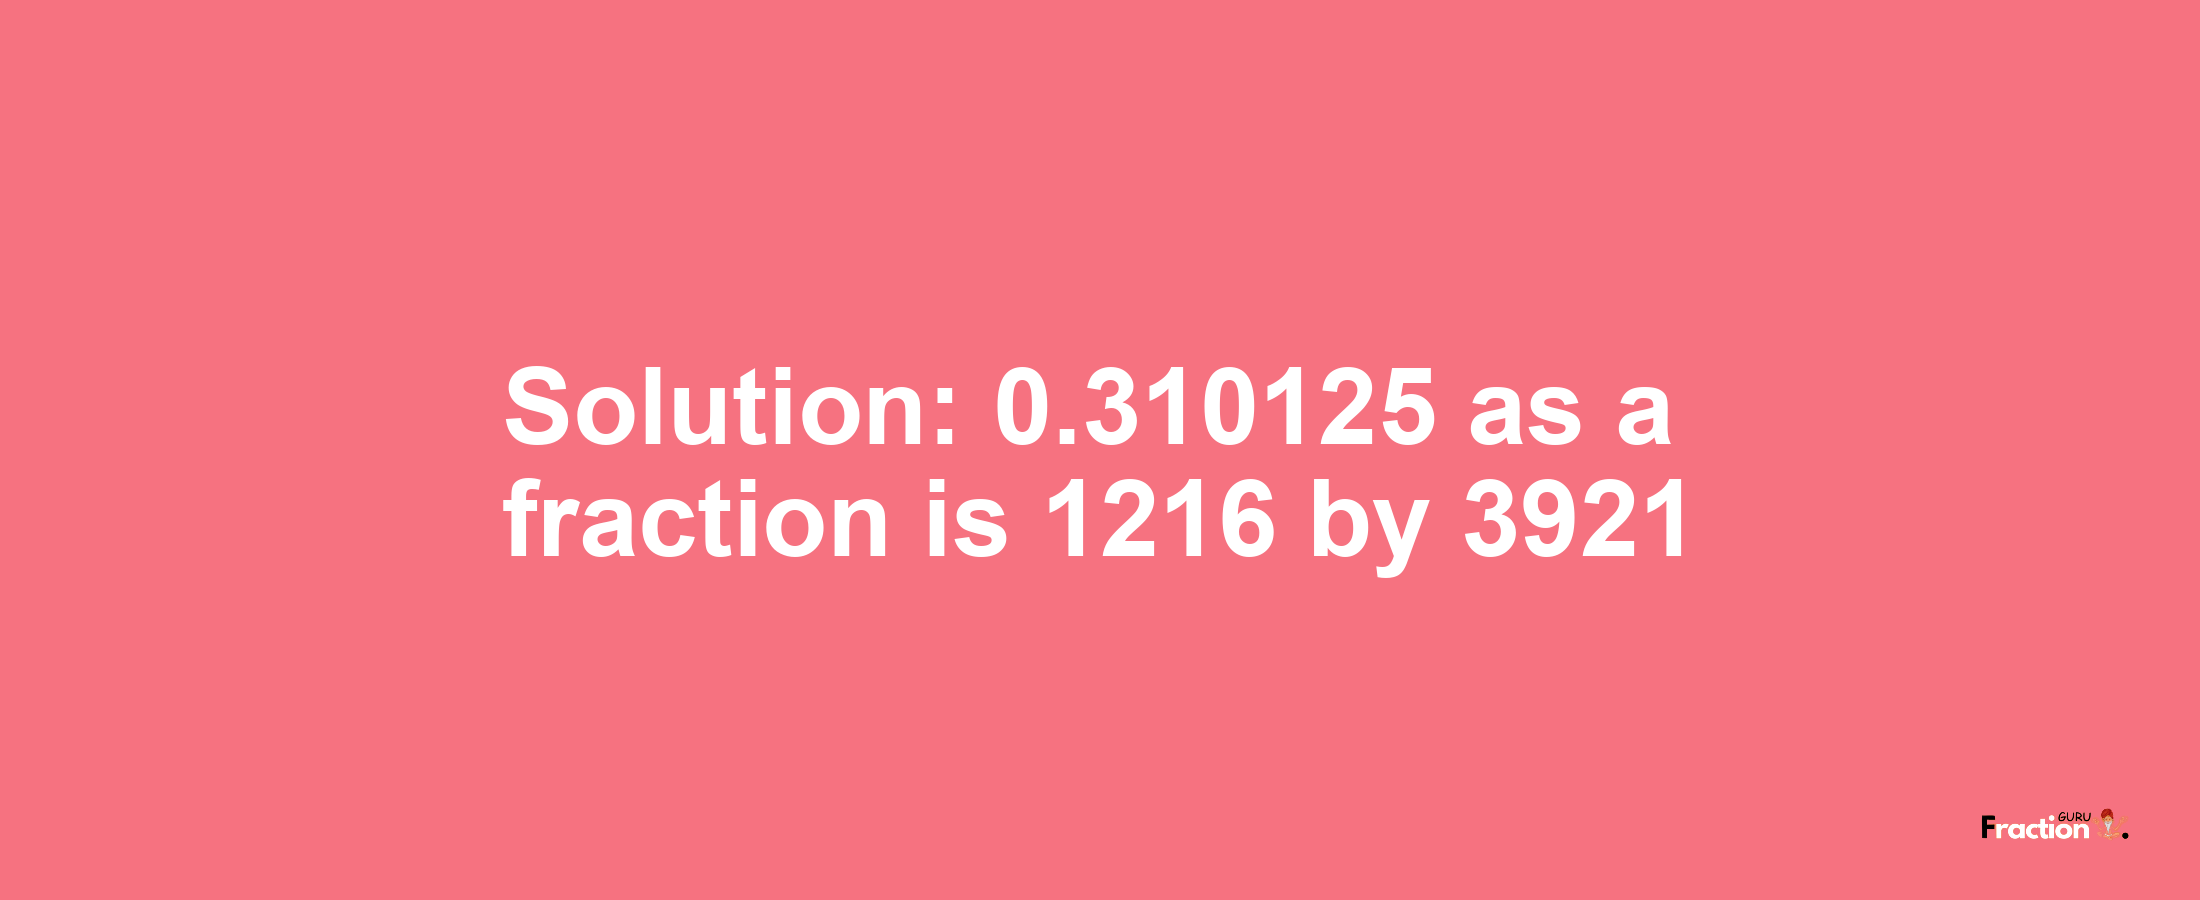 Solution:0.310125 as a fraction is 1216/3921